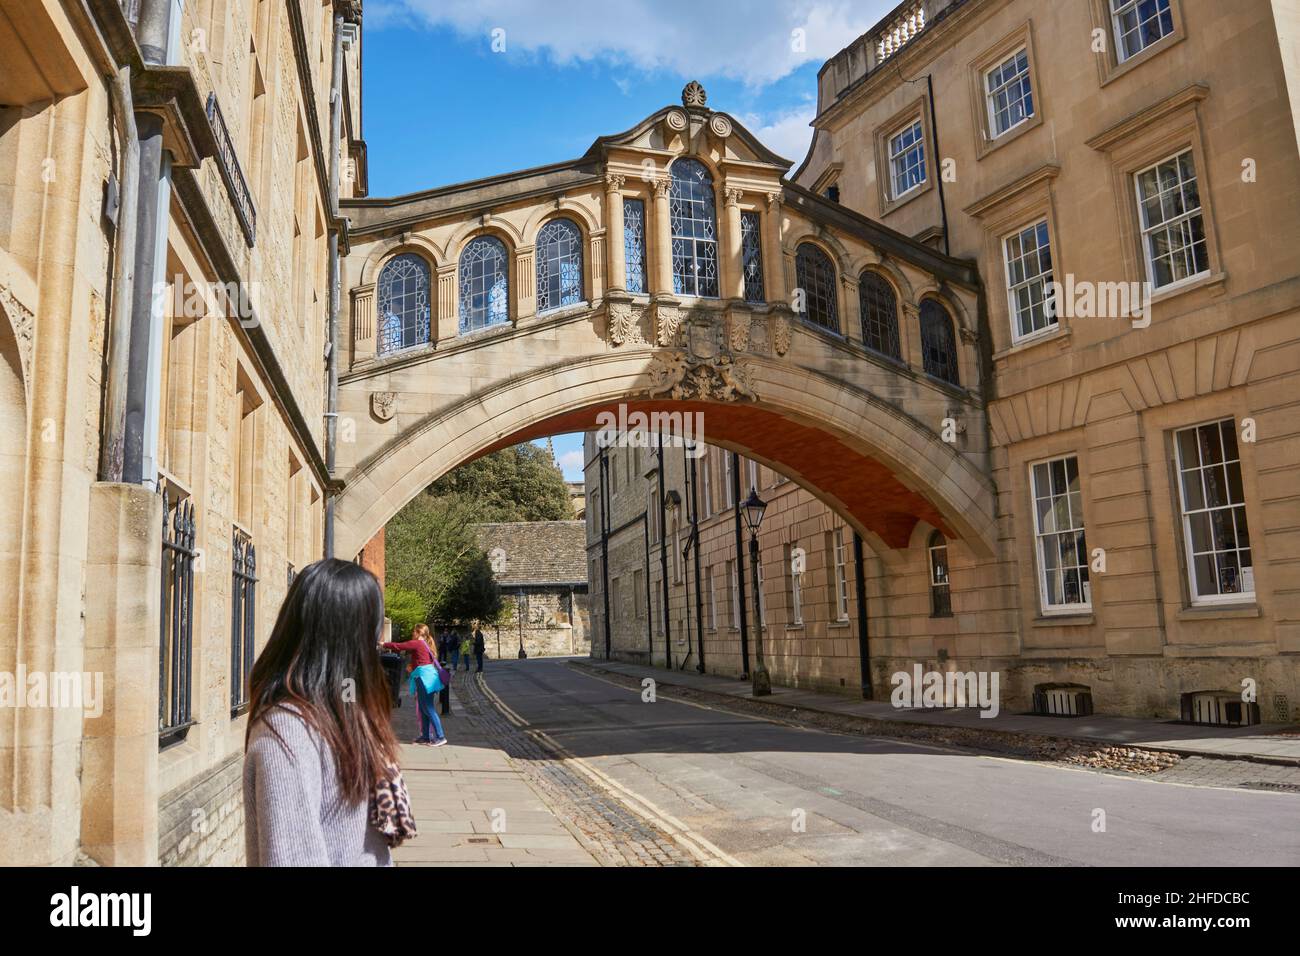 OXFORD, UK - April 13, 2021. Hertford Bridge, or Bridge of Sighs, a skyway between two buildings of Hertford College of Oxford University, Oxford, Eng Stock Photo